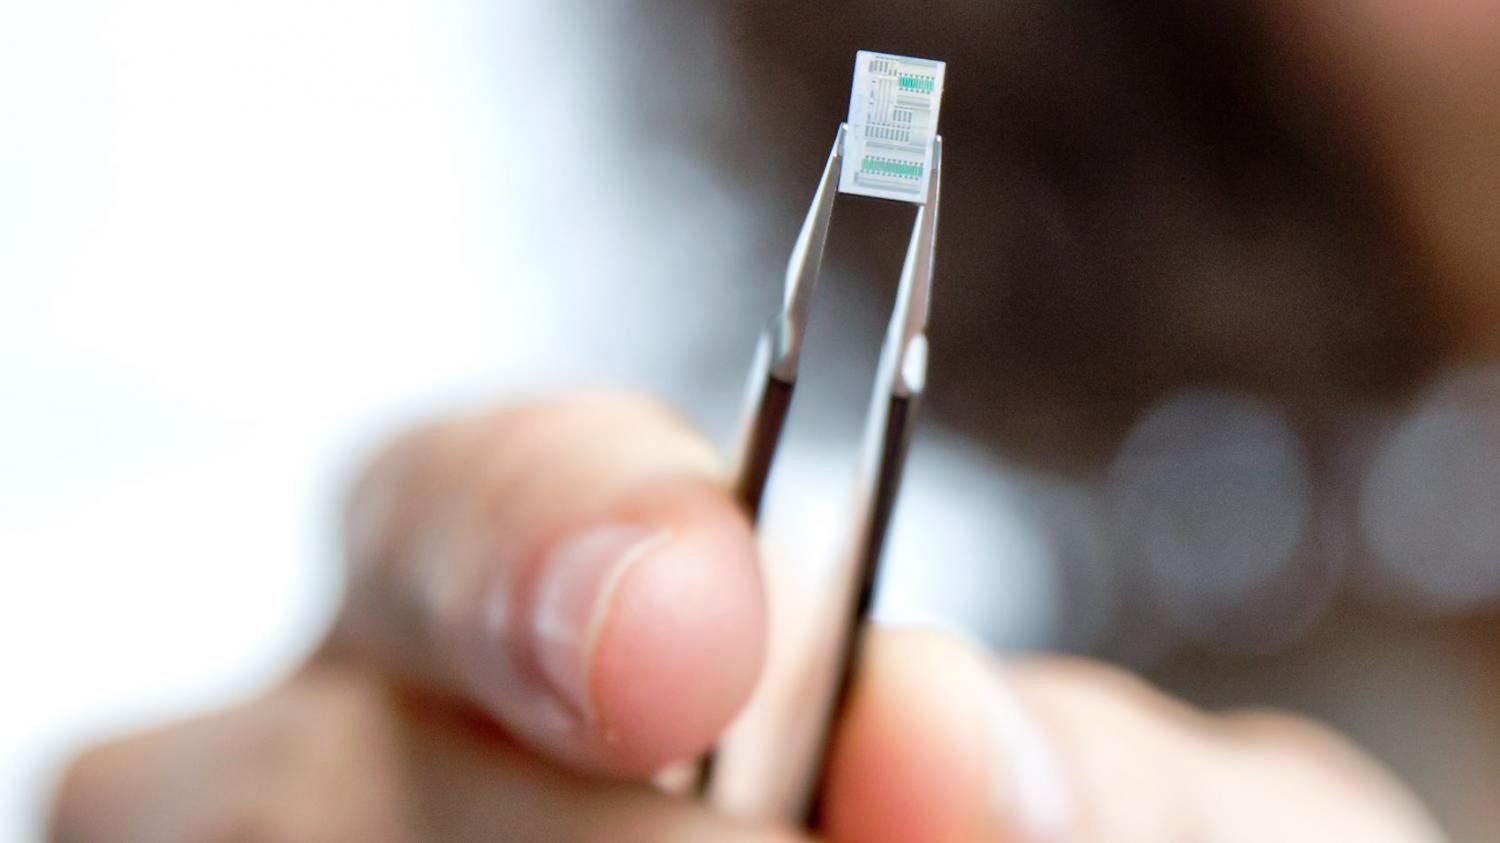 Next generation electronics will be powered by air not silicon, new research